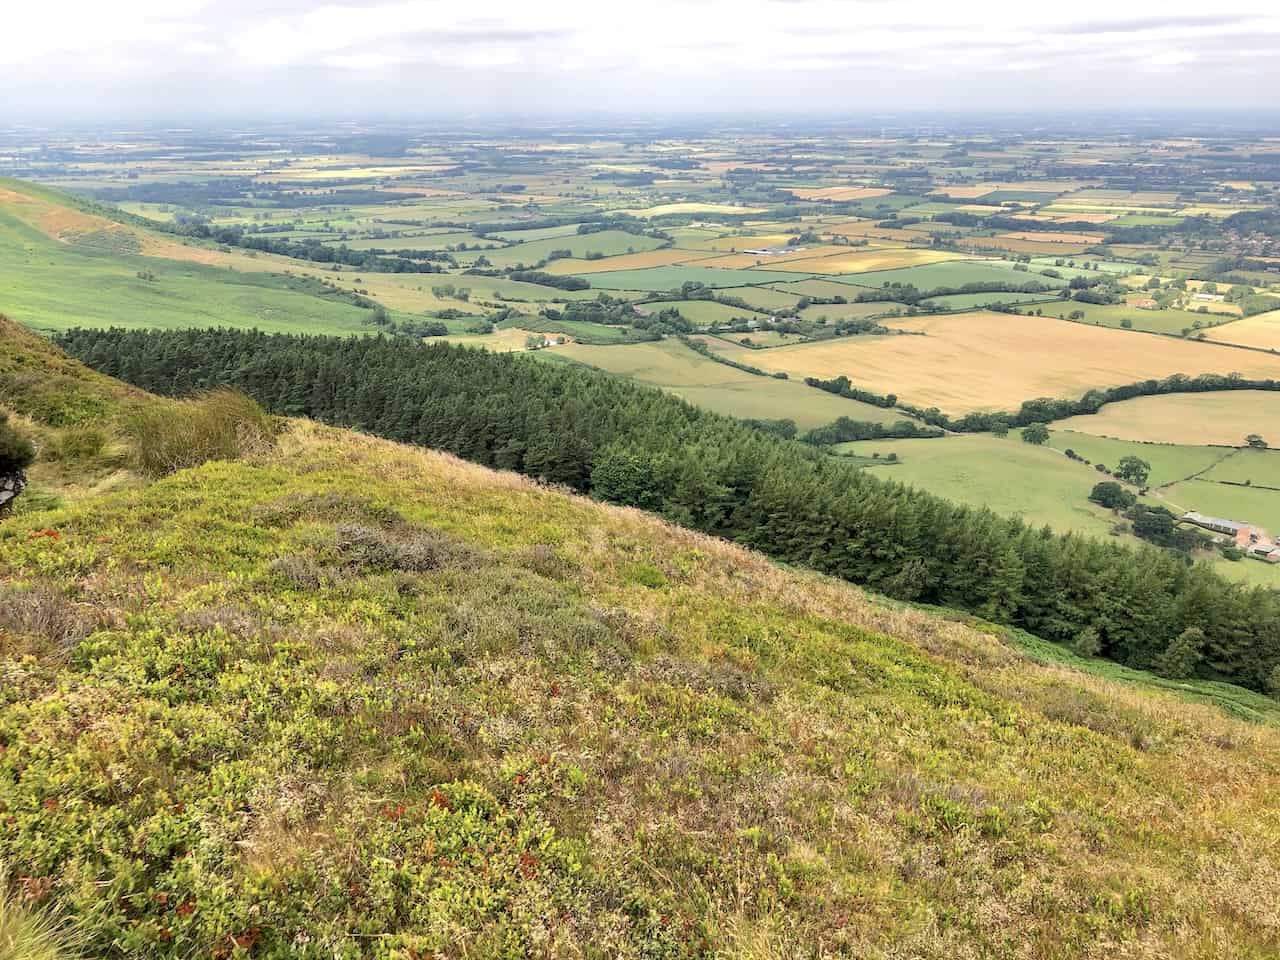 The north-western vista from Cold Moor unfolds over the Tees Valley lowlands, offering expansive views of this amazing area.